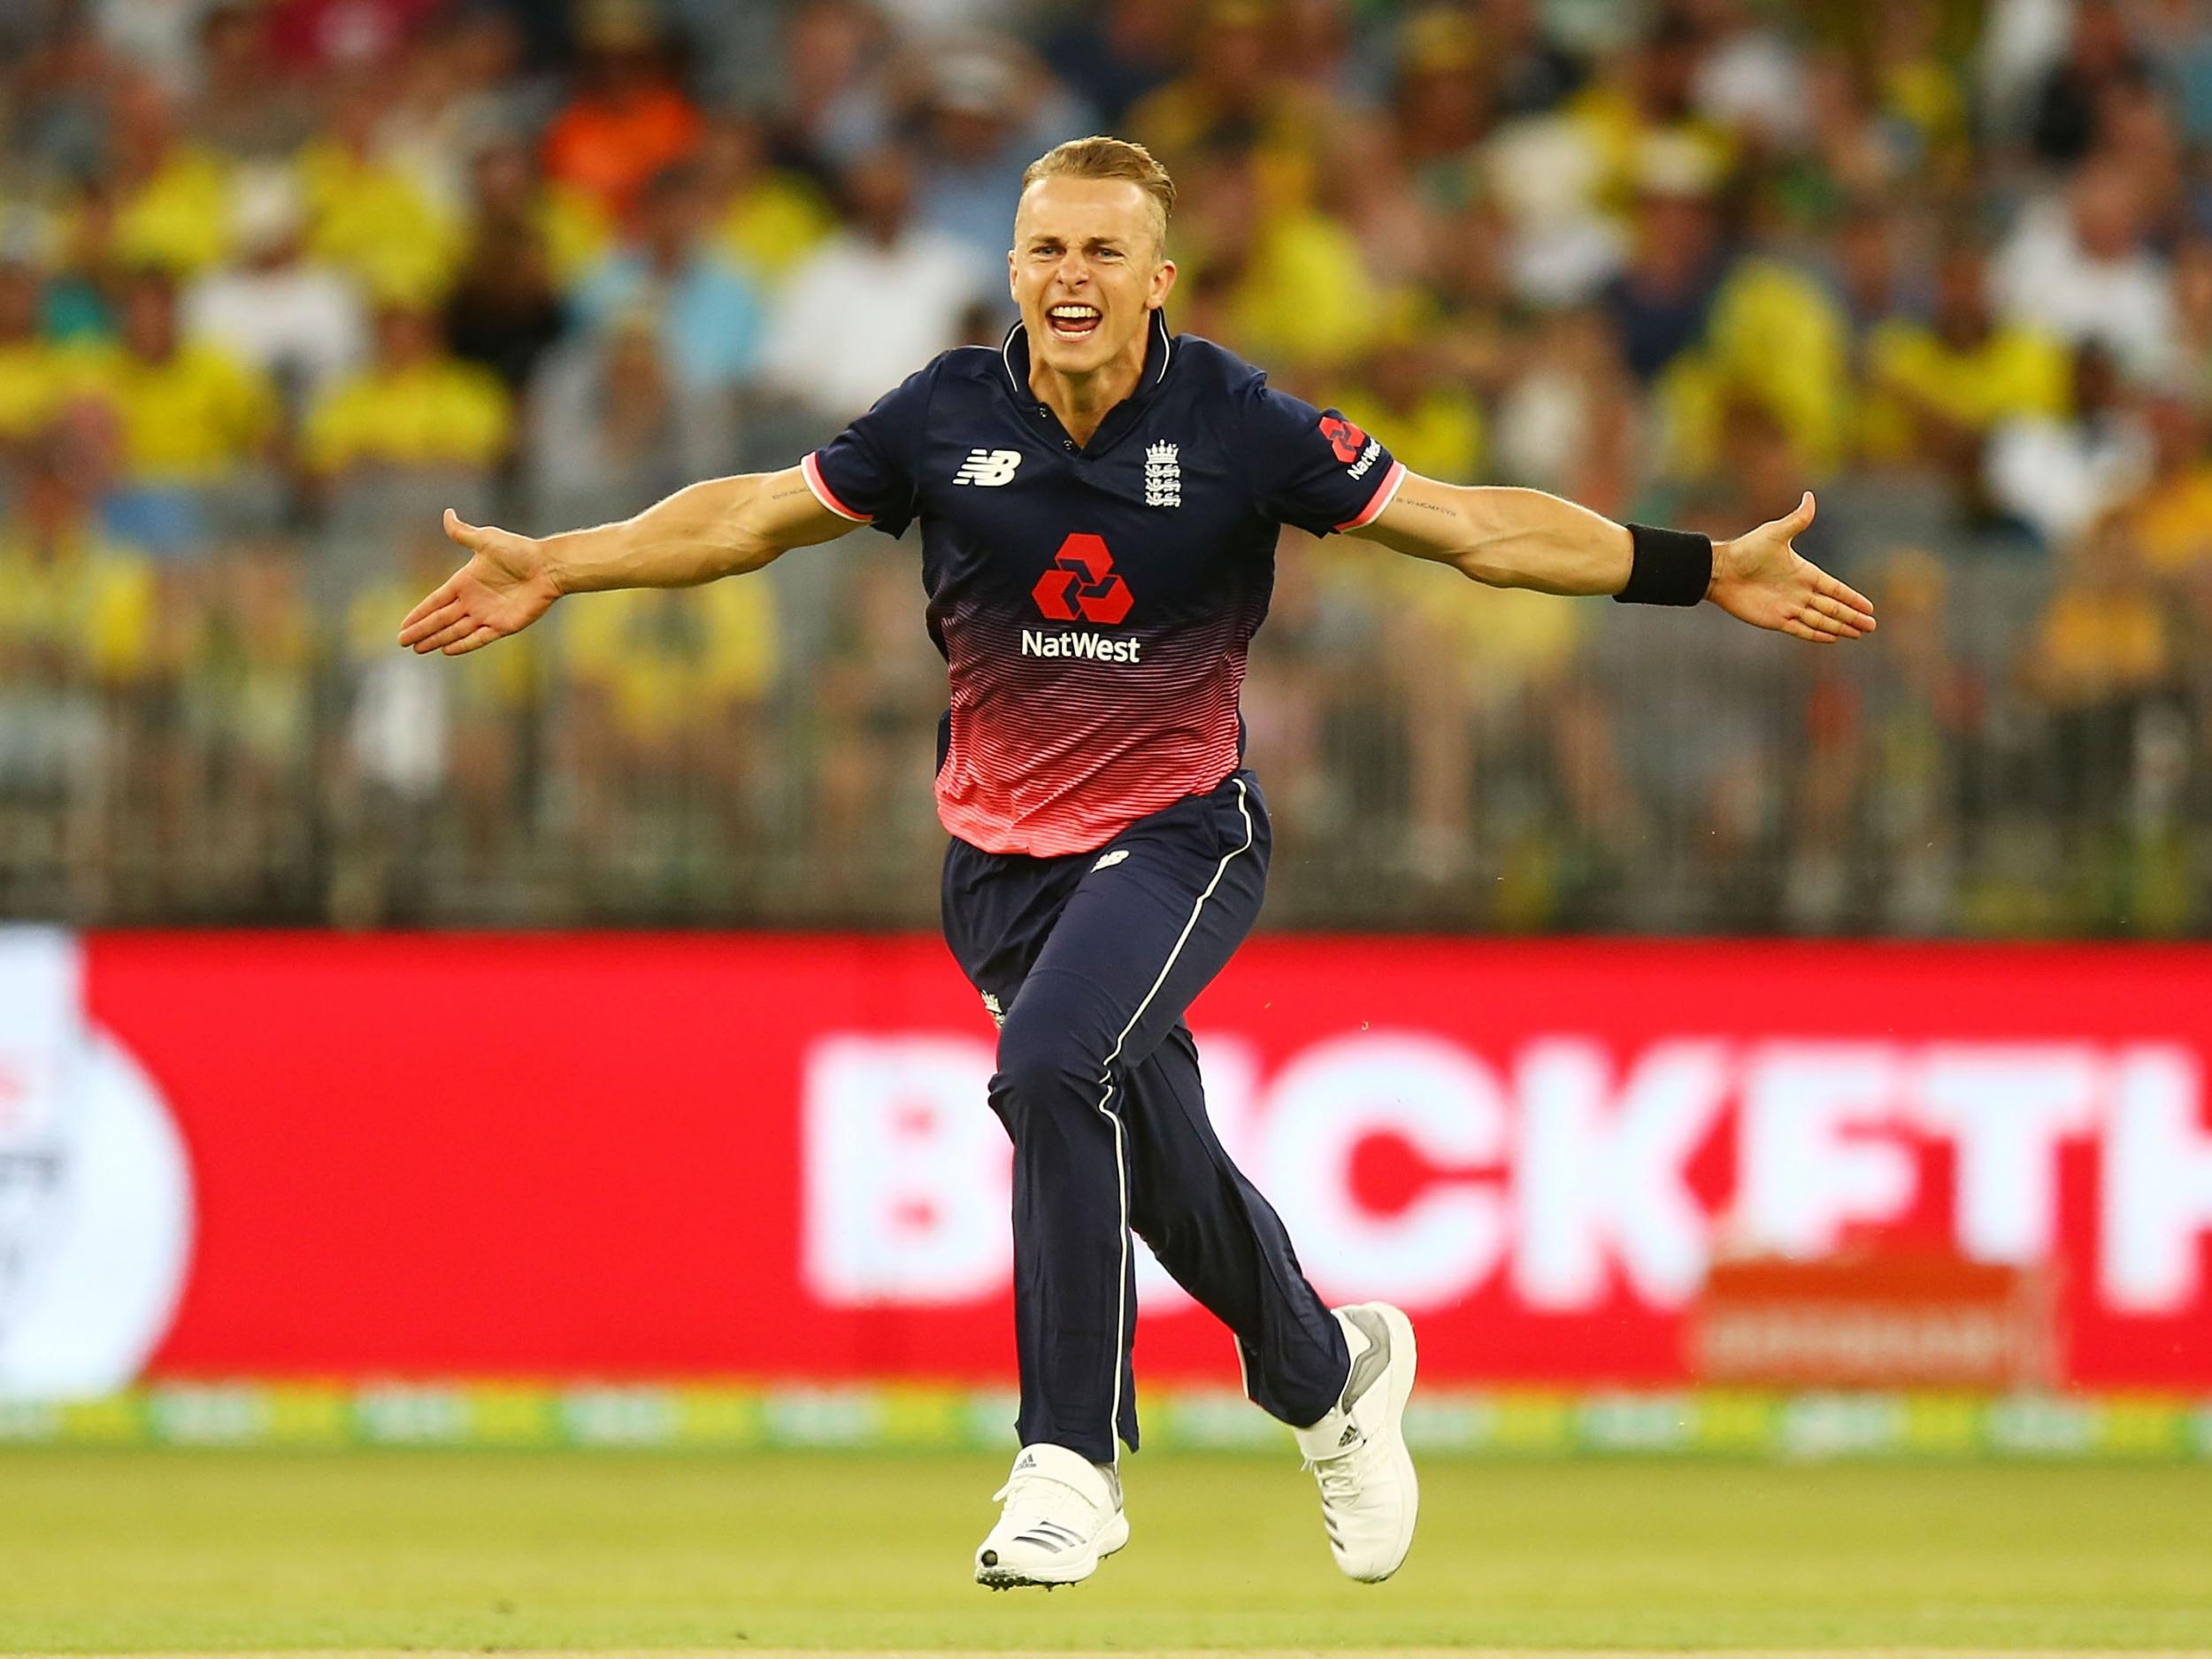 Curran took the crucial last two wickets